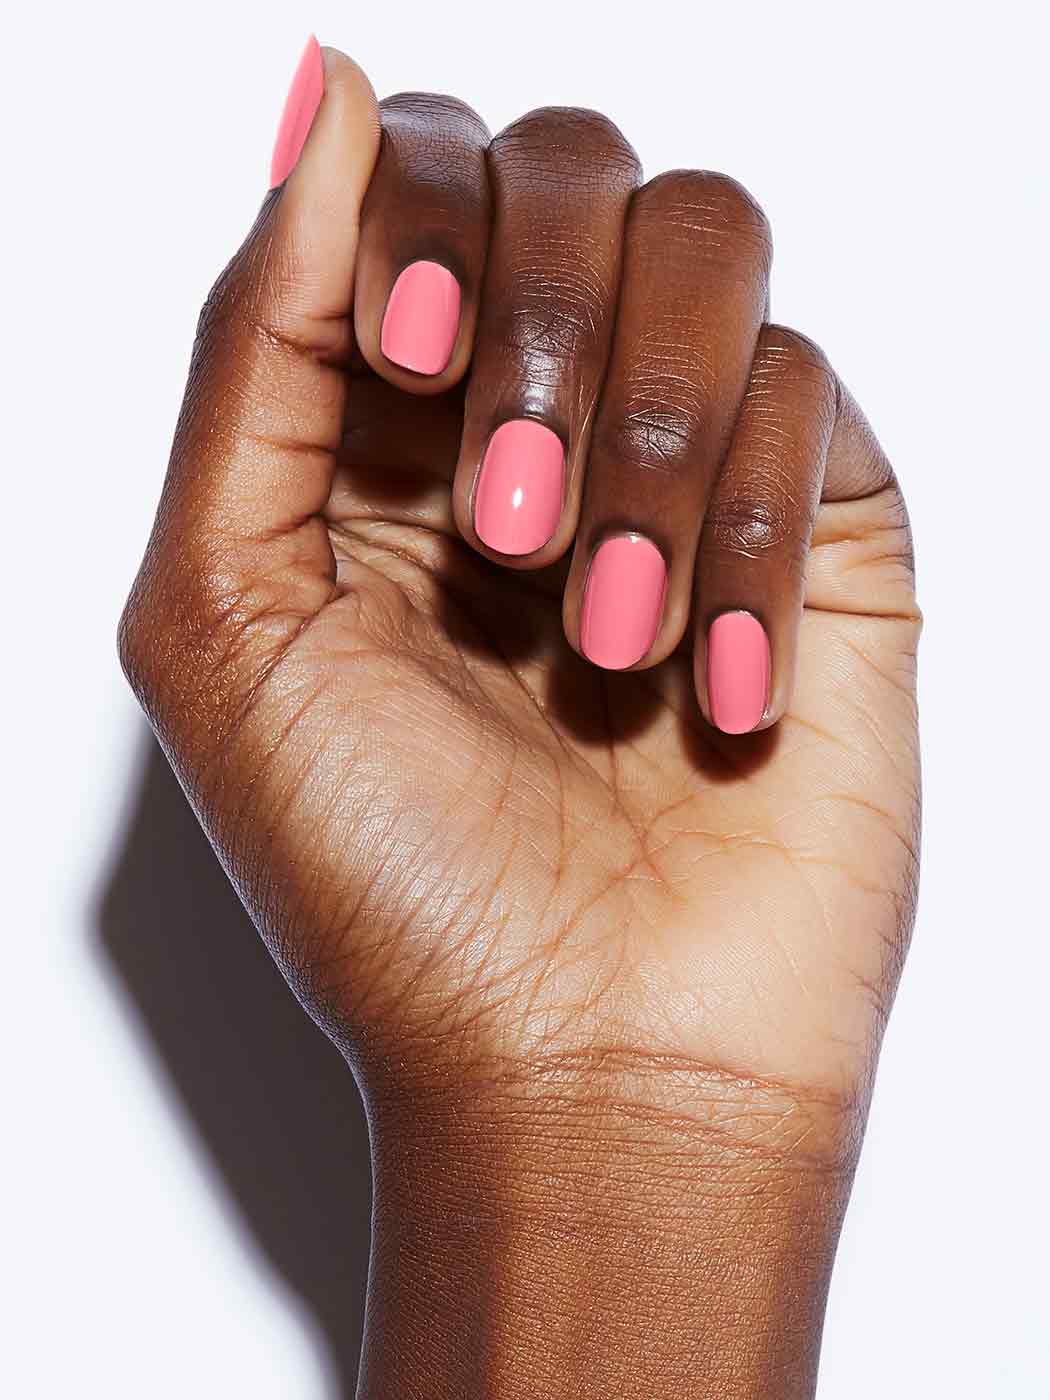 Manicure Monday | Models Own - Coral Reef | The Vegan Taff